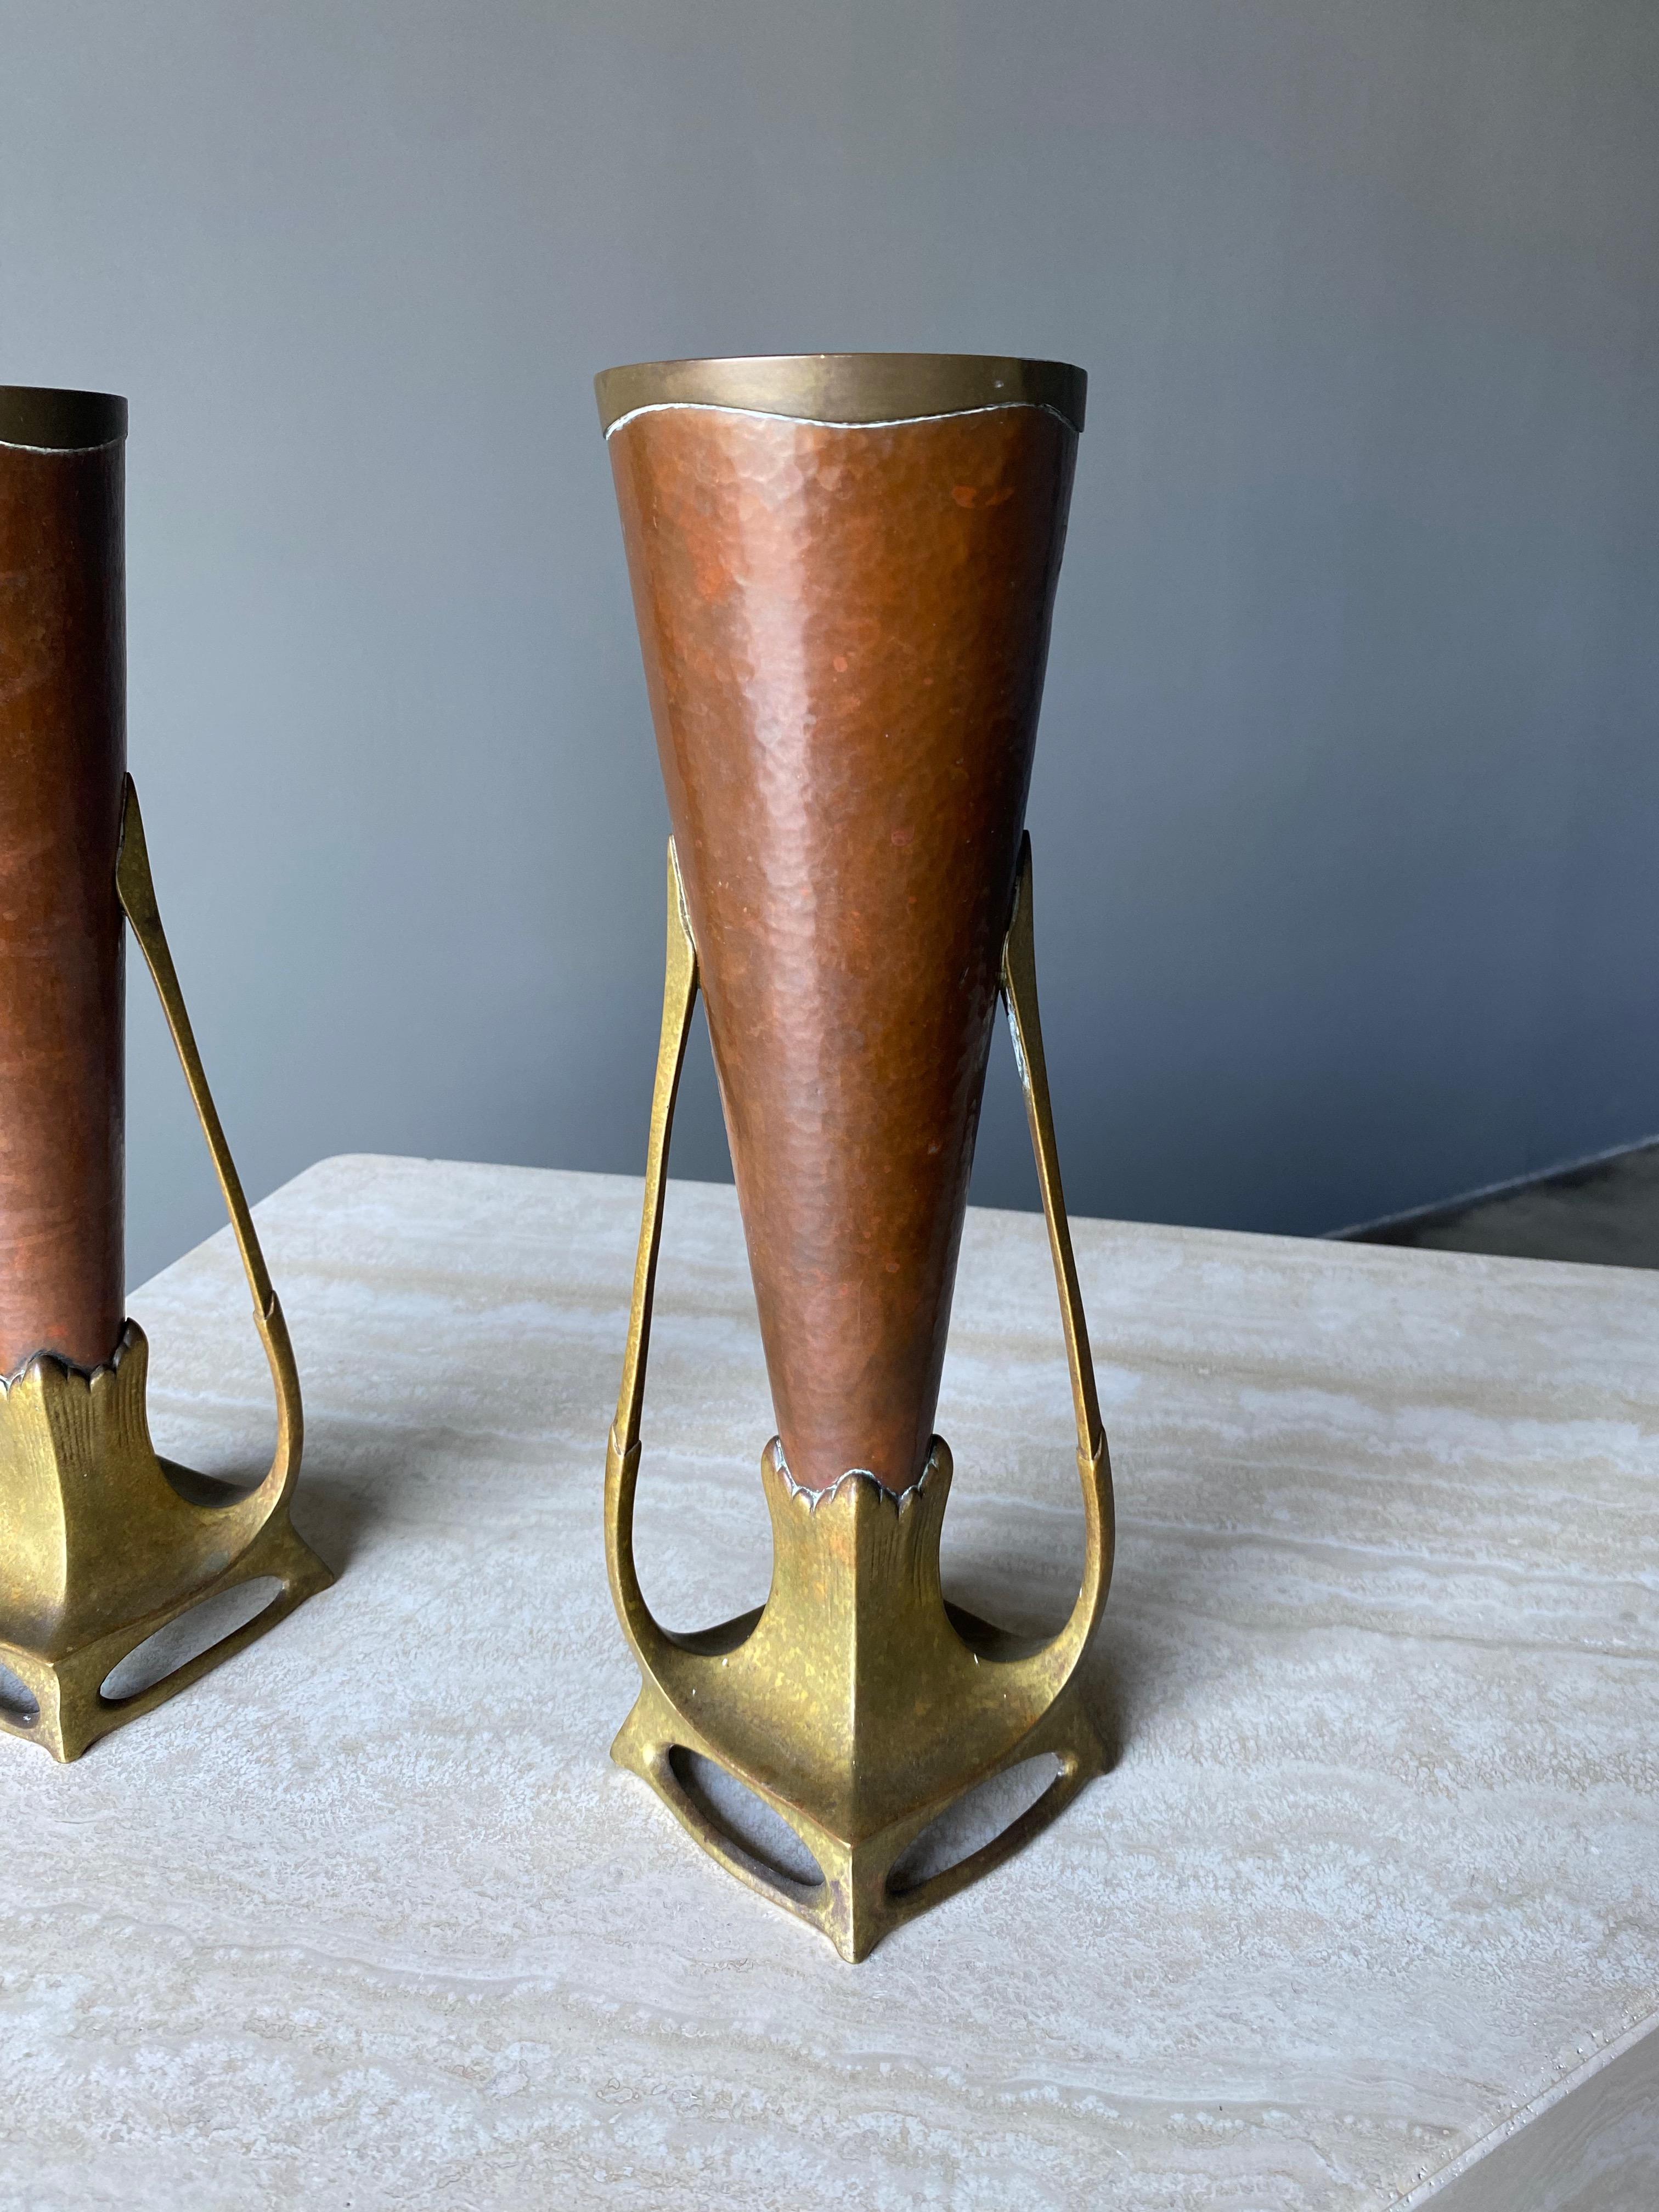 Carl Deffner Pair of Hammered Copper & Cast Bronze Vases, Germany, circa 1900 For Sale 6